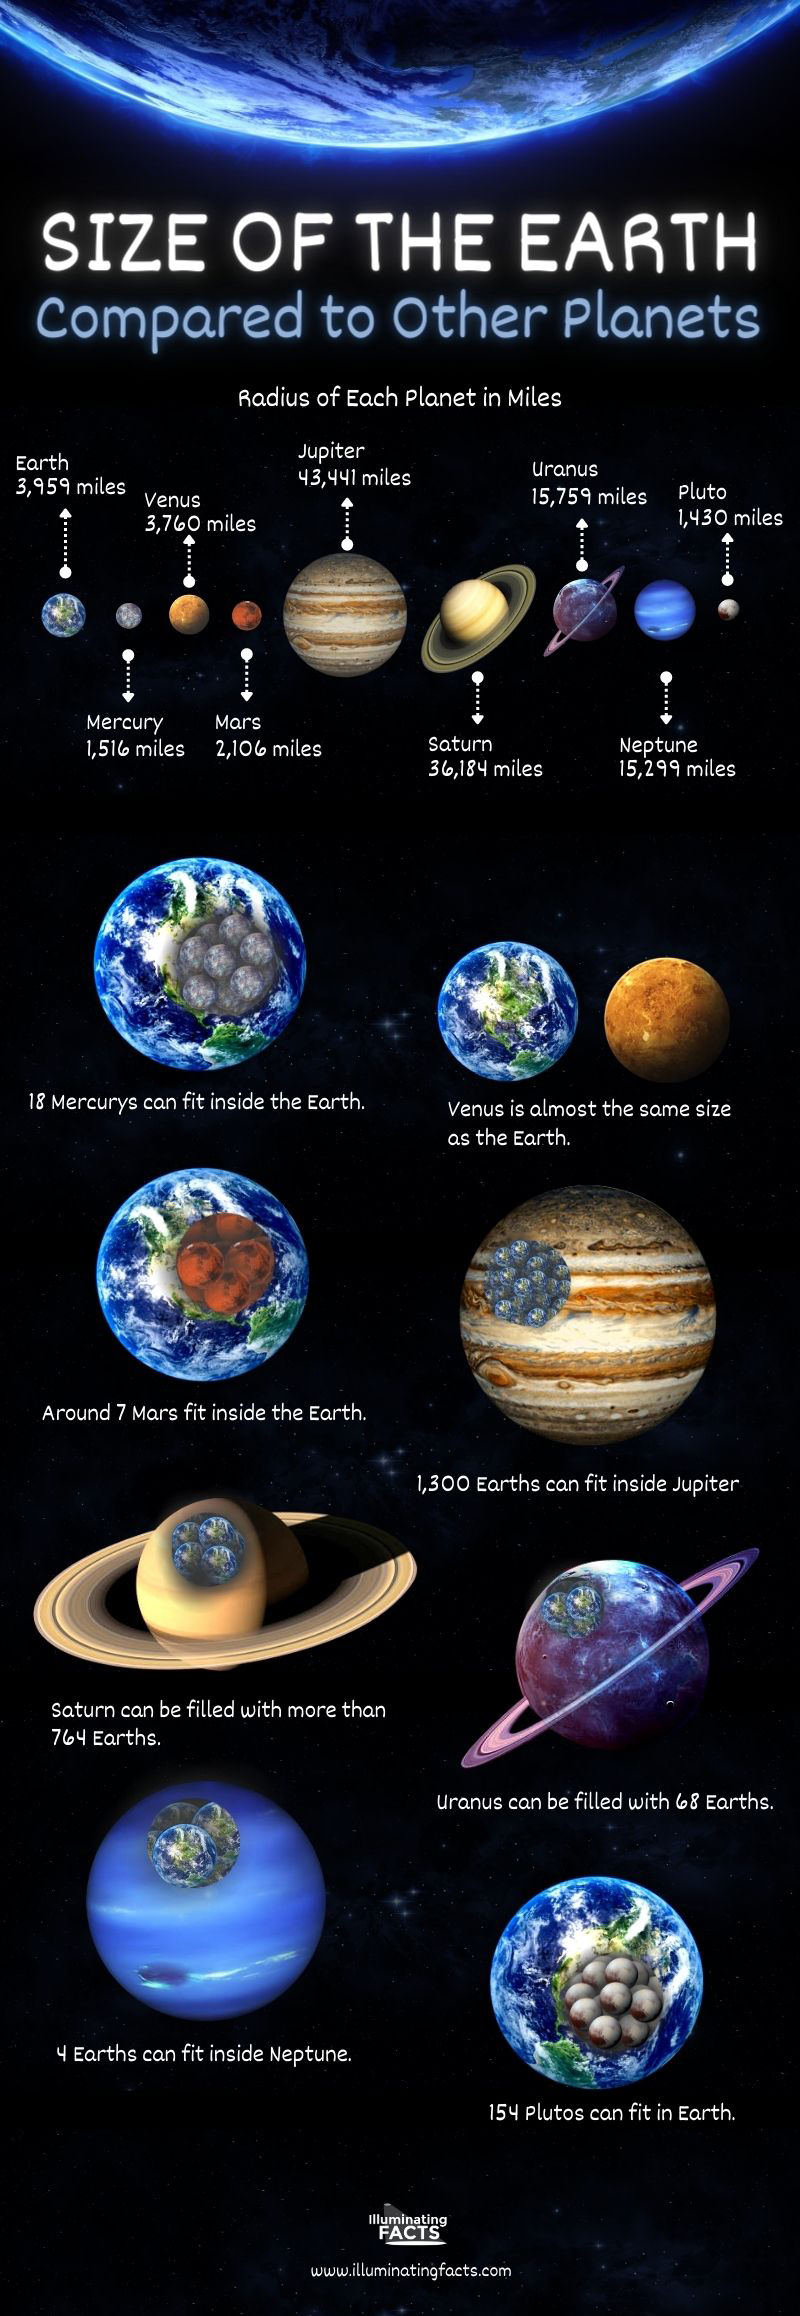 Size-of-the-Earth-Compared-to-Other-Planets